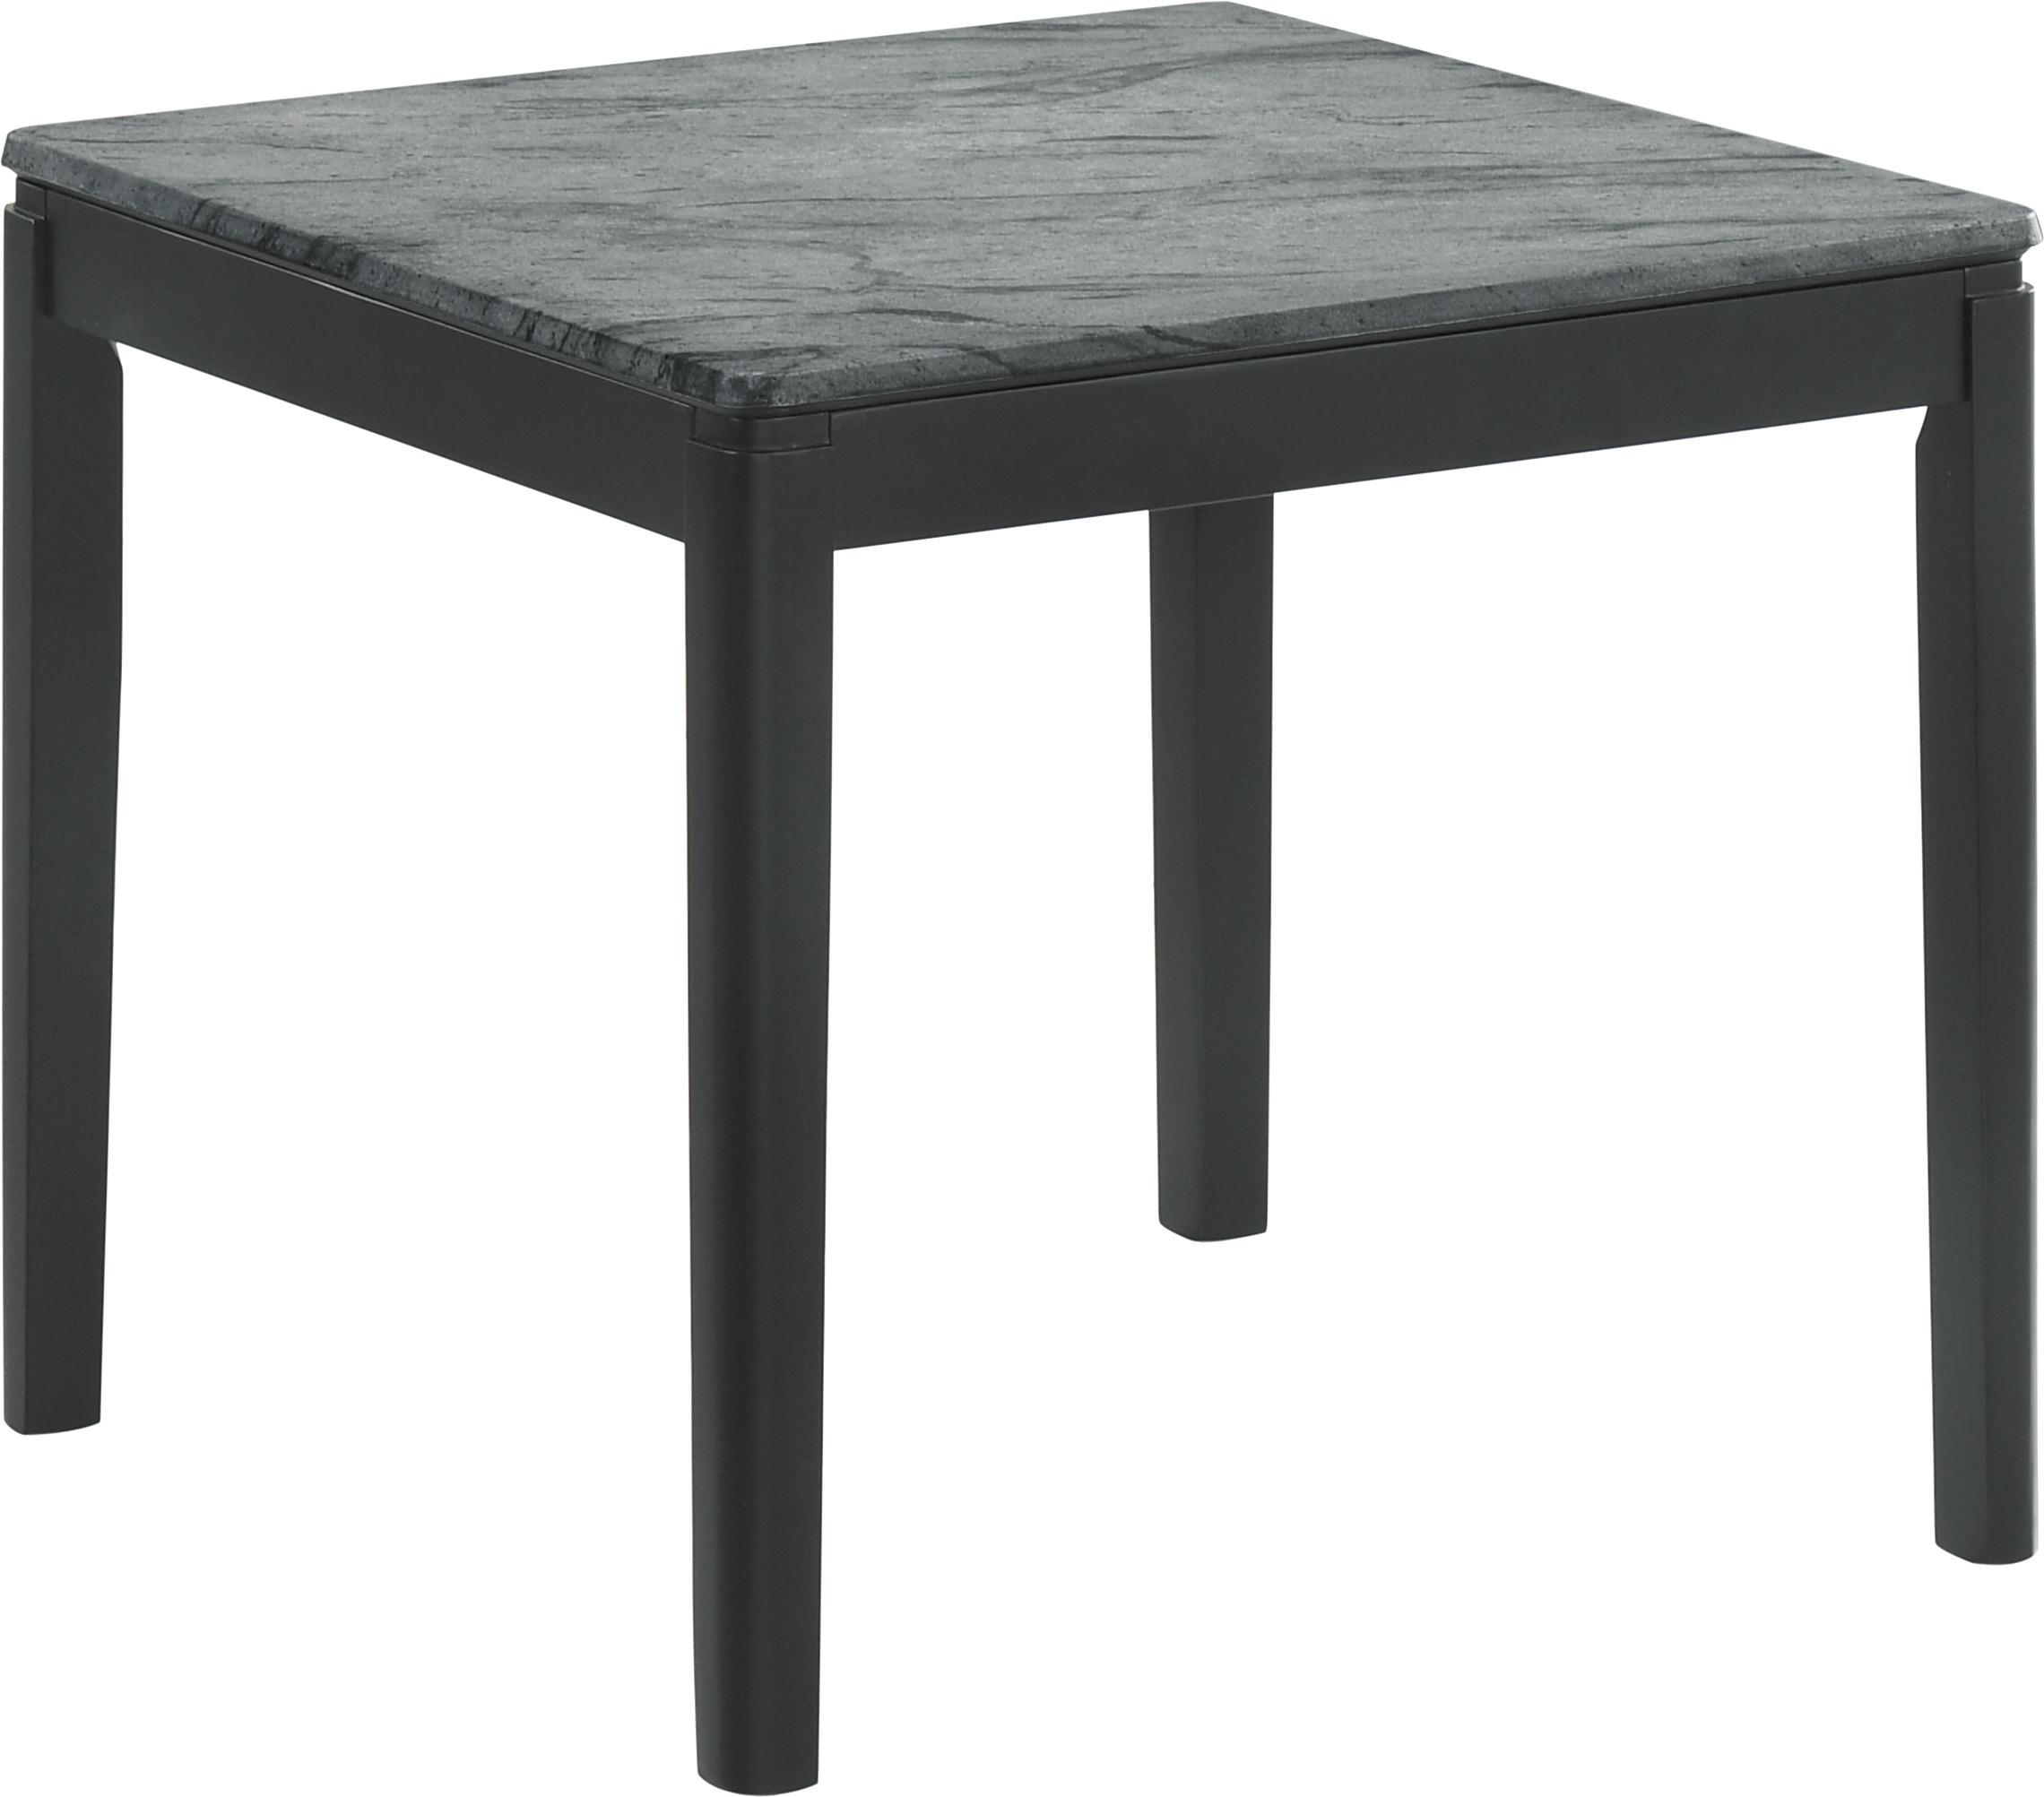 Modern End Table 753517 753517 in Gray 